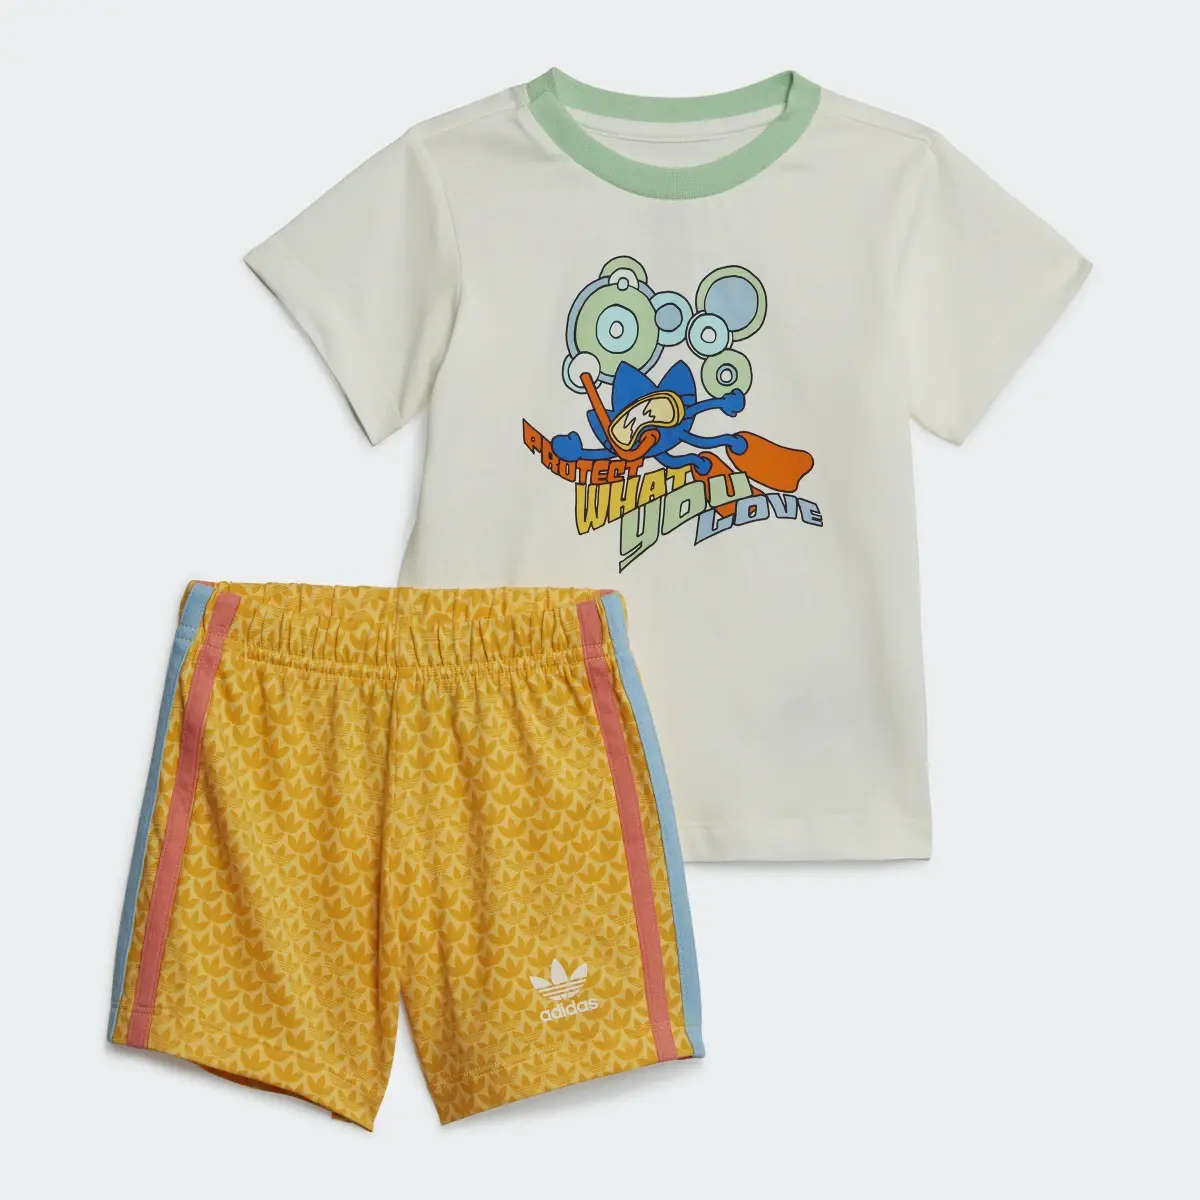 Adidas Completo Graphic Print Shorts and Tee. 2